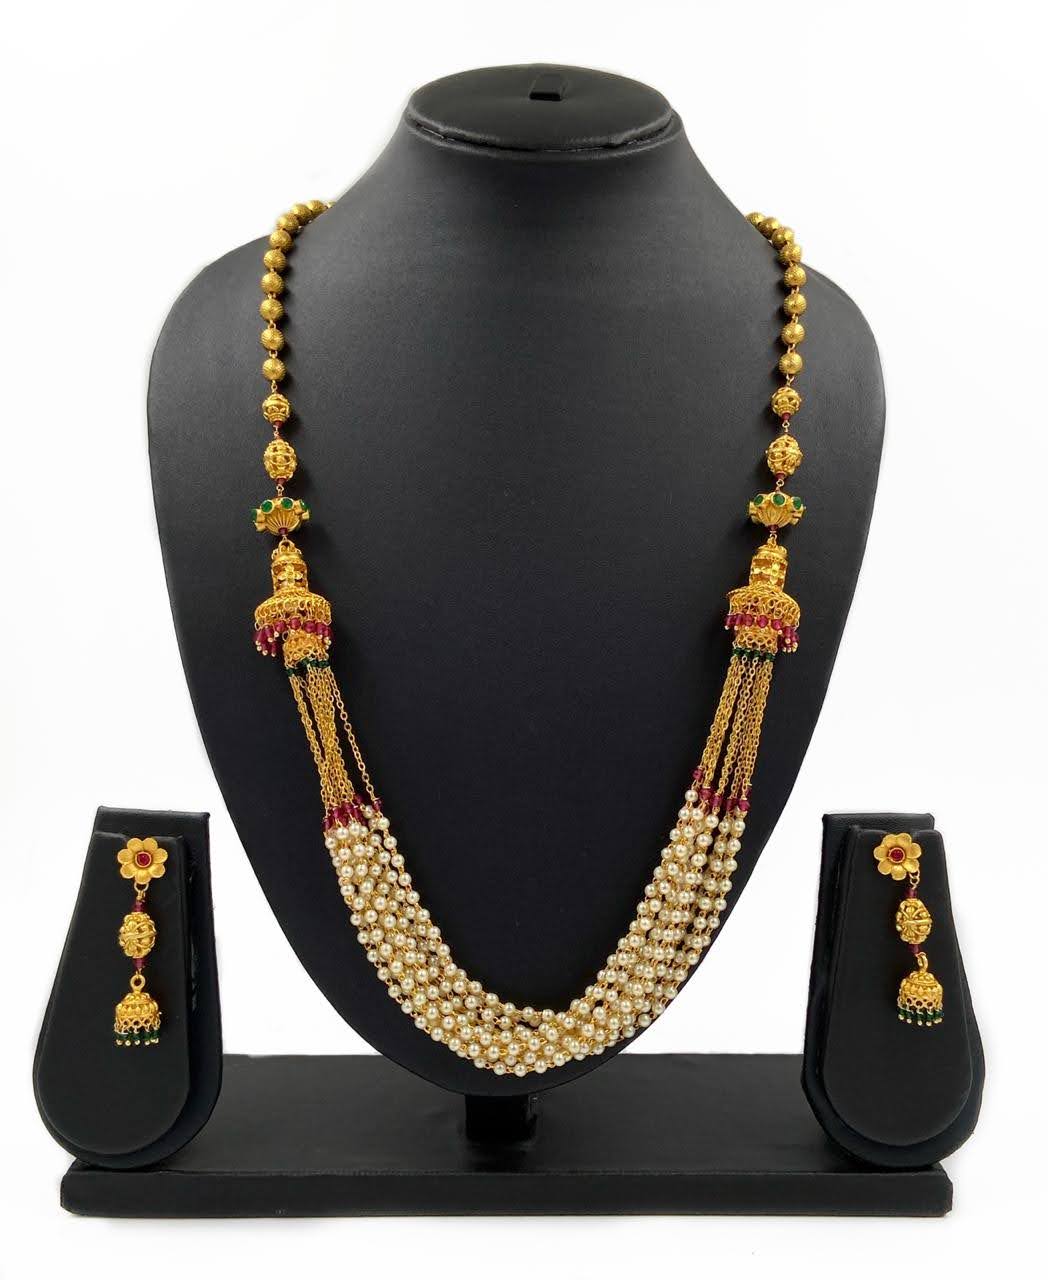 Designer Antique Gold Plated Long Golden Chains Pearls Beaded Necklace For Woman Beads Jewellery